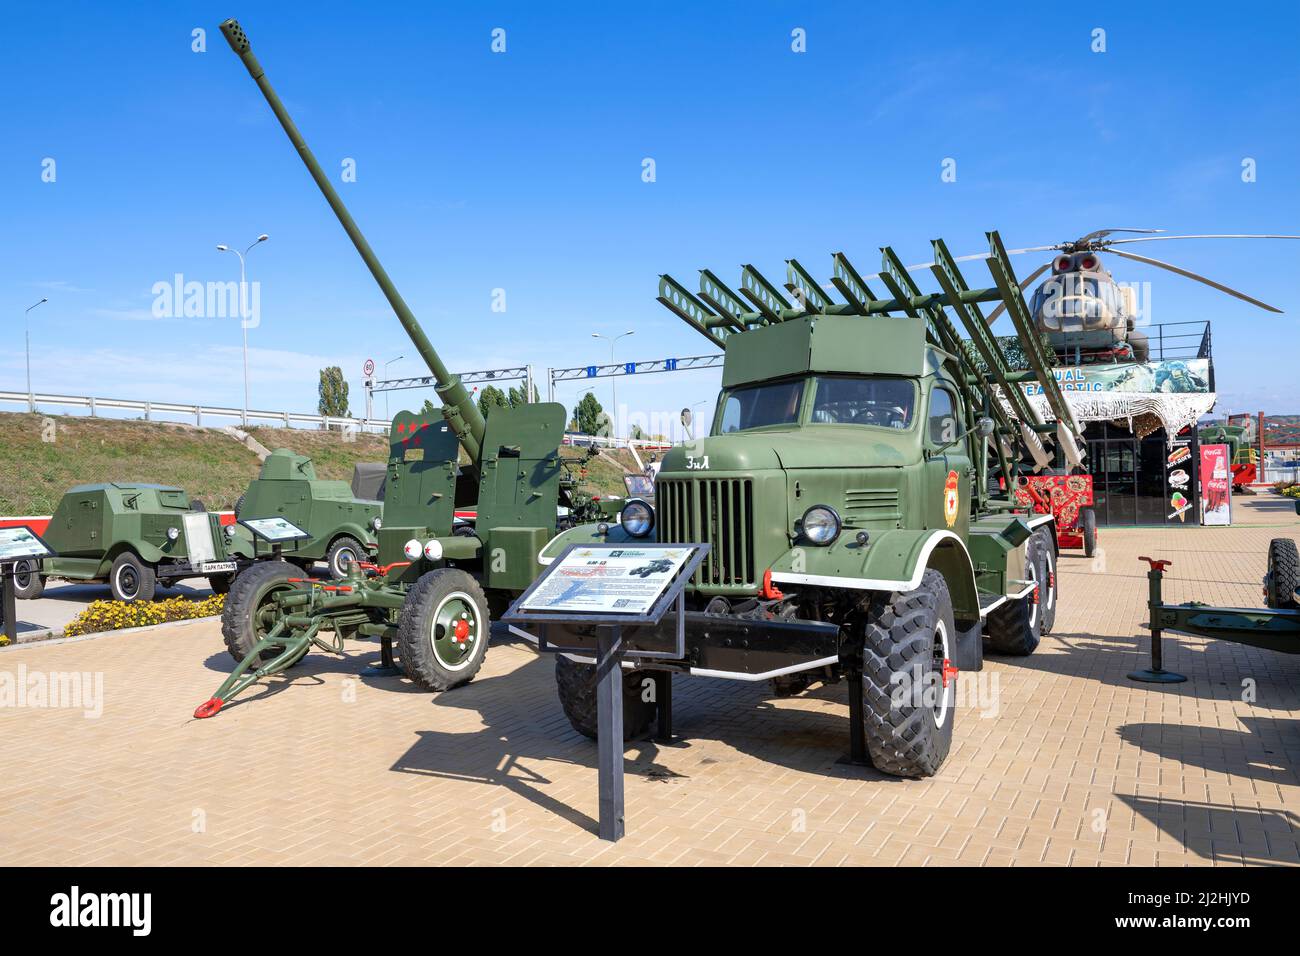 KAMENSK-SHAKHTINSKY, RUSSIA - FEBRUARY 12, 2022: BM-13 is a Soviet rocket artillery combat vehicle in the Patriot Park exposition on a sunny day Stock Photo